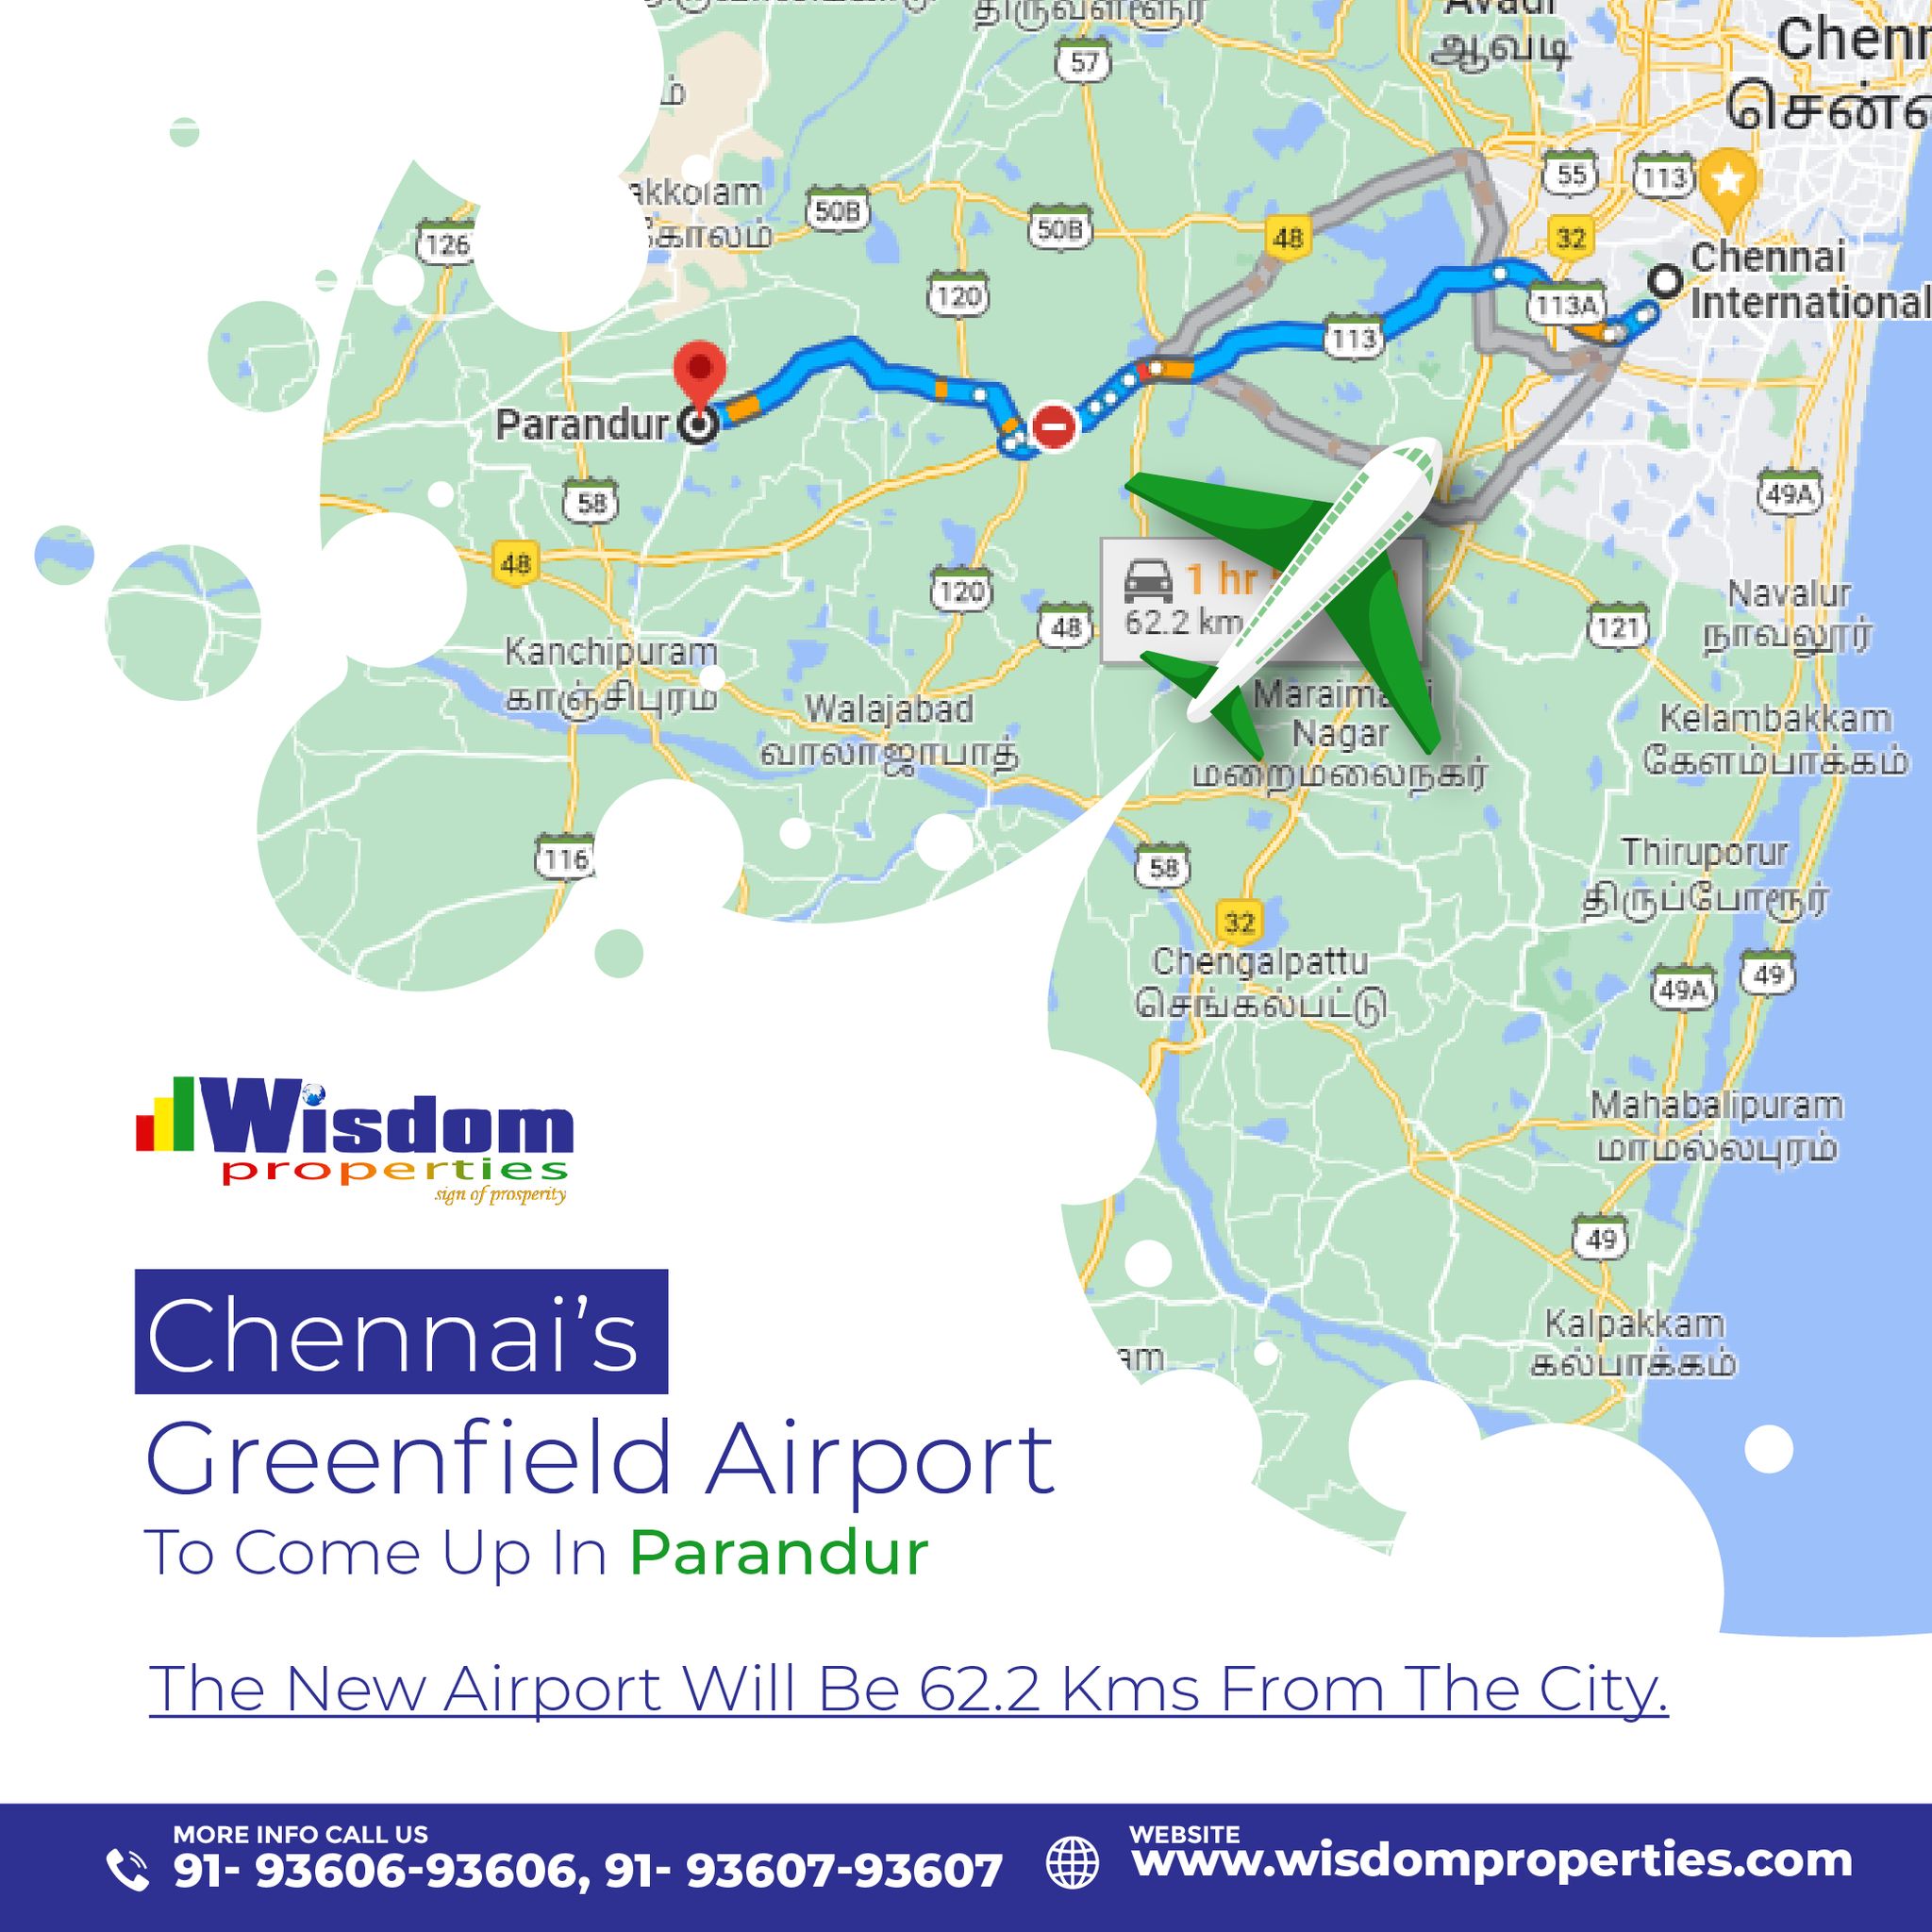 Chennai's Greenfield Airport To Come Up in Parandur